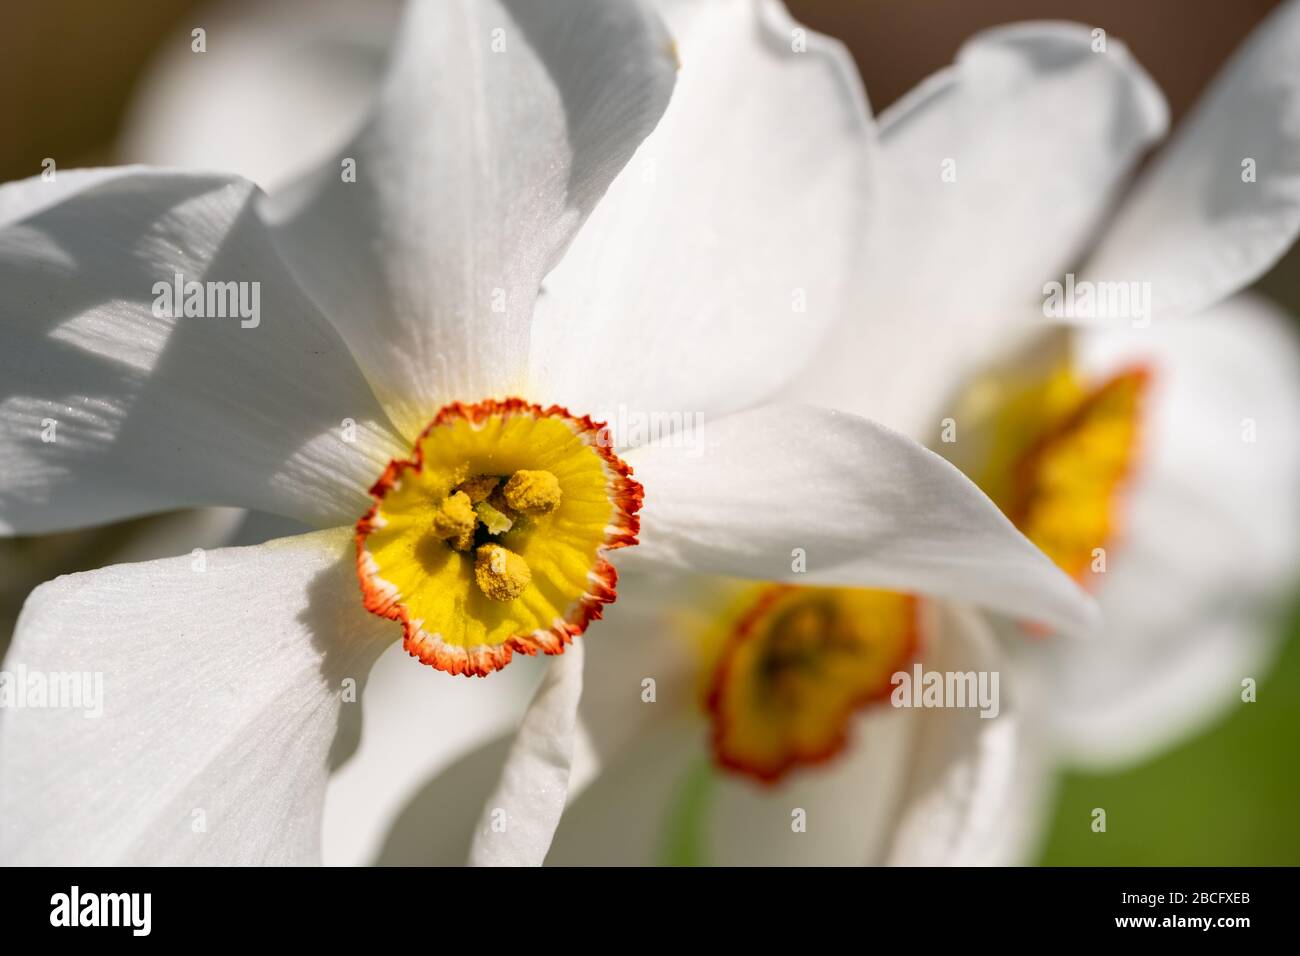 Spring flowers Narcissus poeticus, also called Poet's narcissus, at the historic walled garden in the Borough of Hillingdon, London, UK. Stock Photo